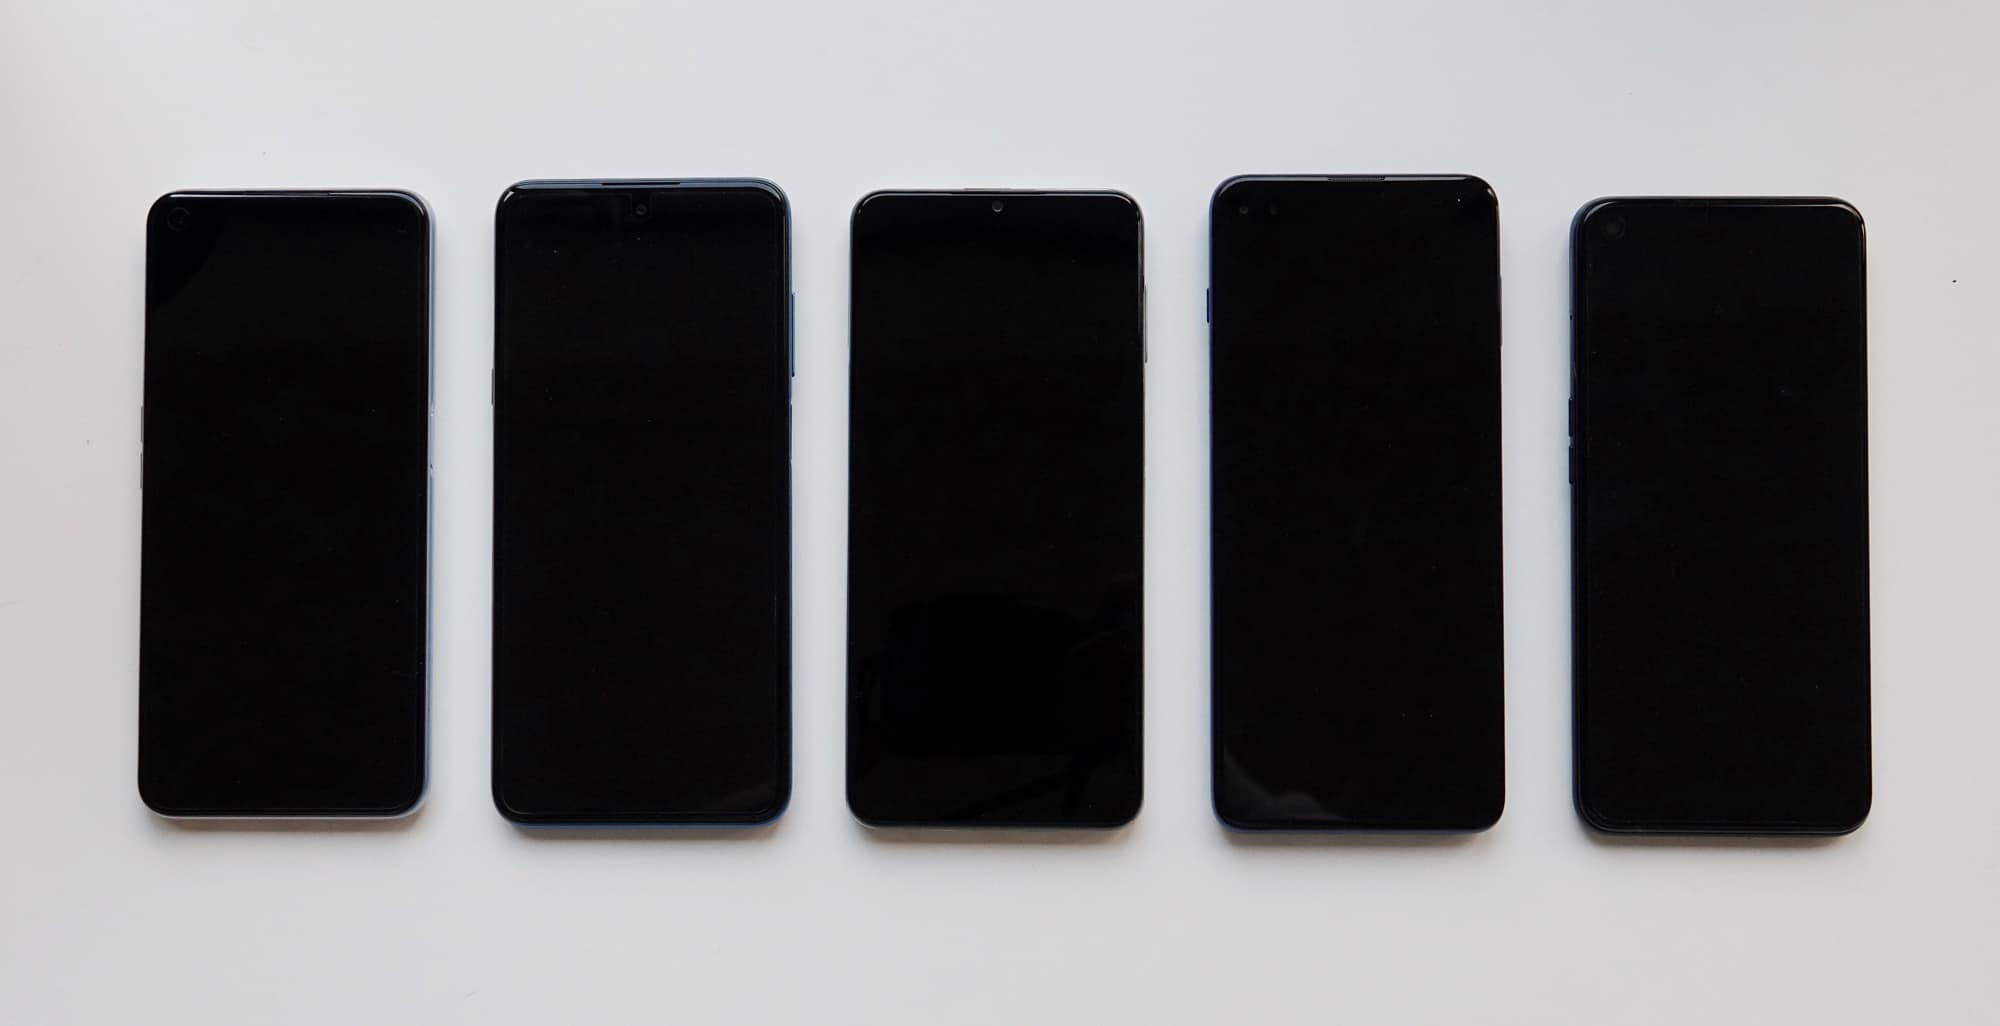 From left to right: Realme 7 5G, TCL 20 5G, Samsung Galaxy A32 5G, Motorola G 5G Plus, Oppo A54 5G.